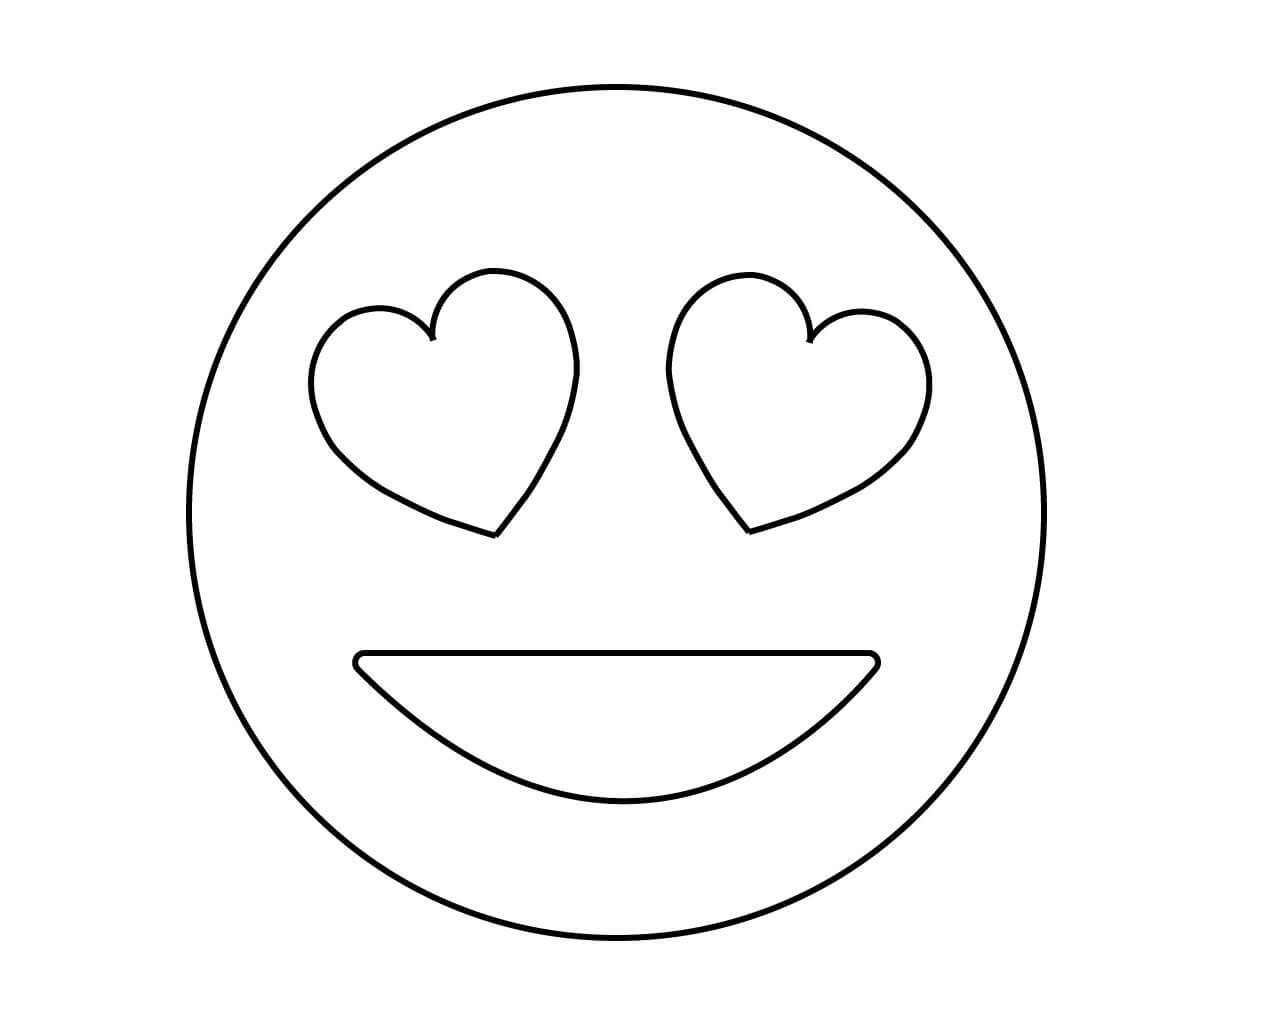 Kissing Emoji Coloring Page Coloring Pages